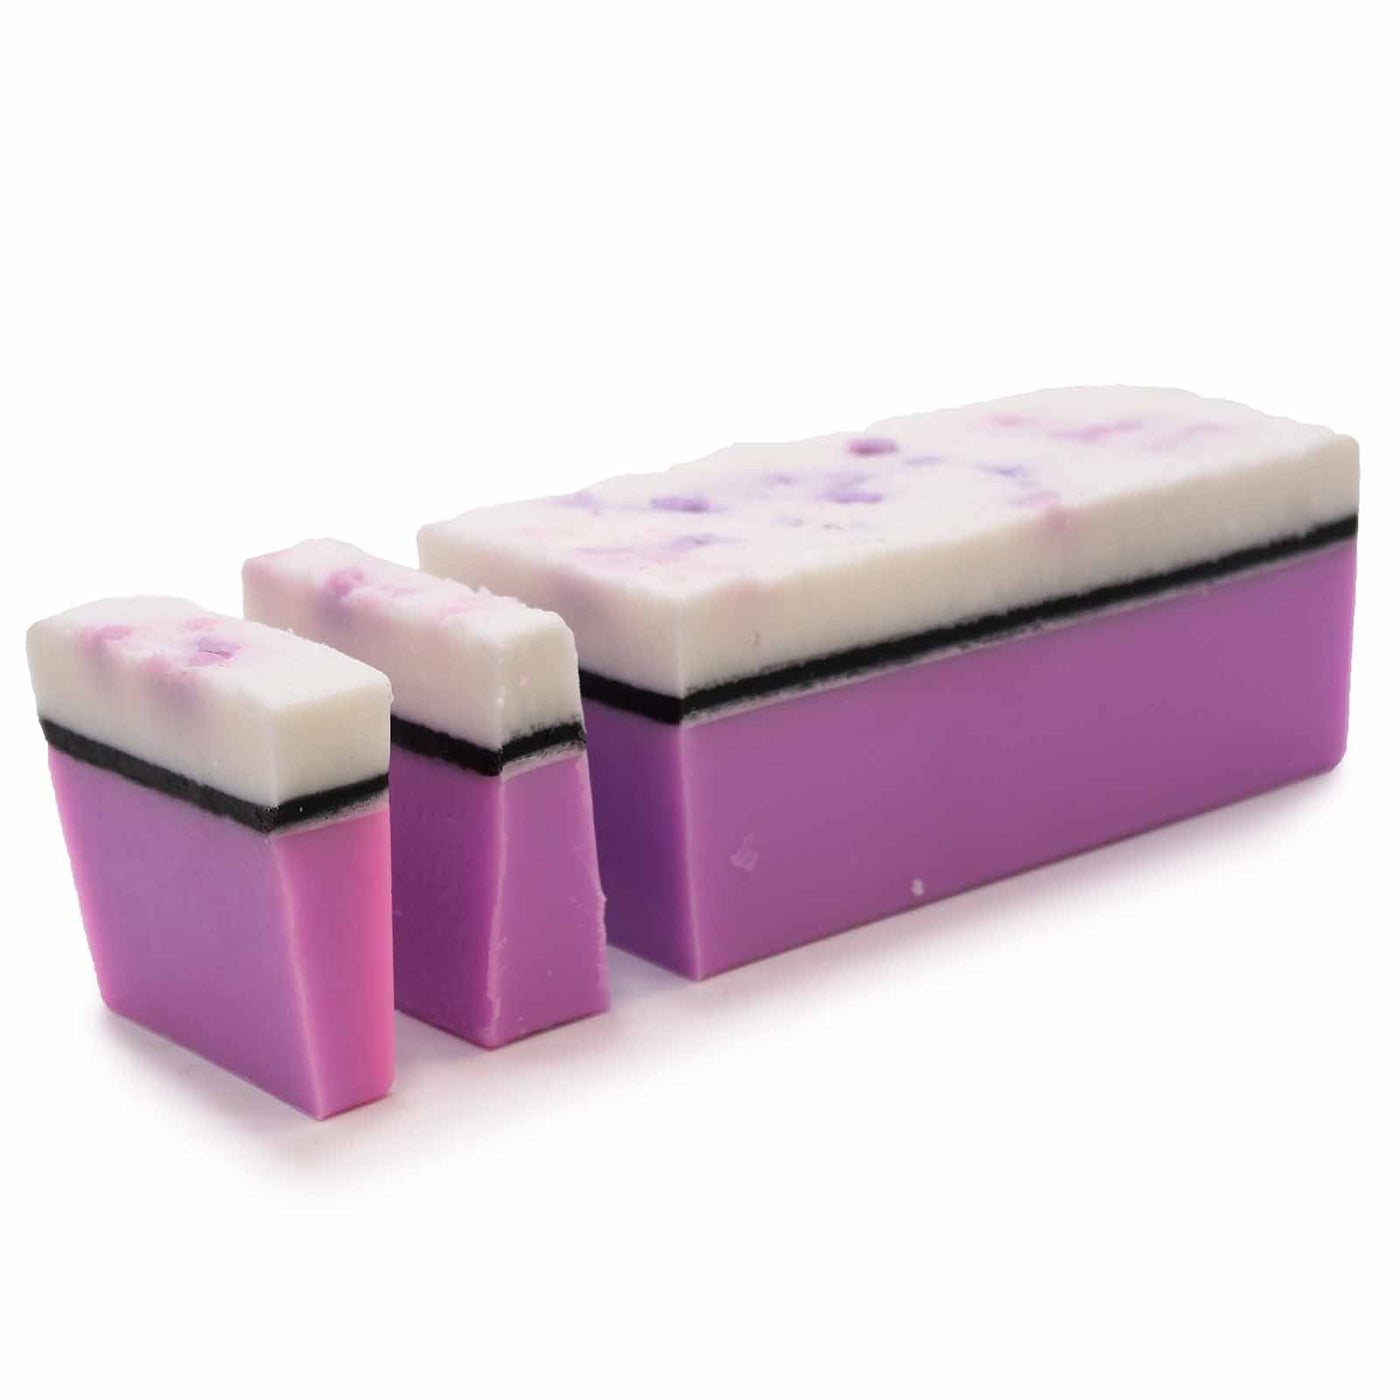 Parma Violet Handcrafted Essential Oil Soap Slices.